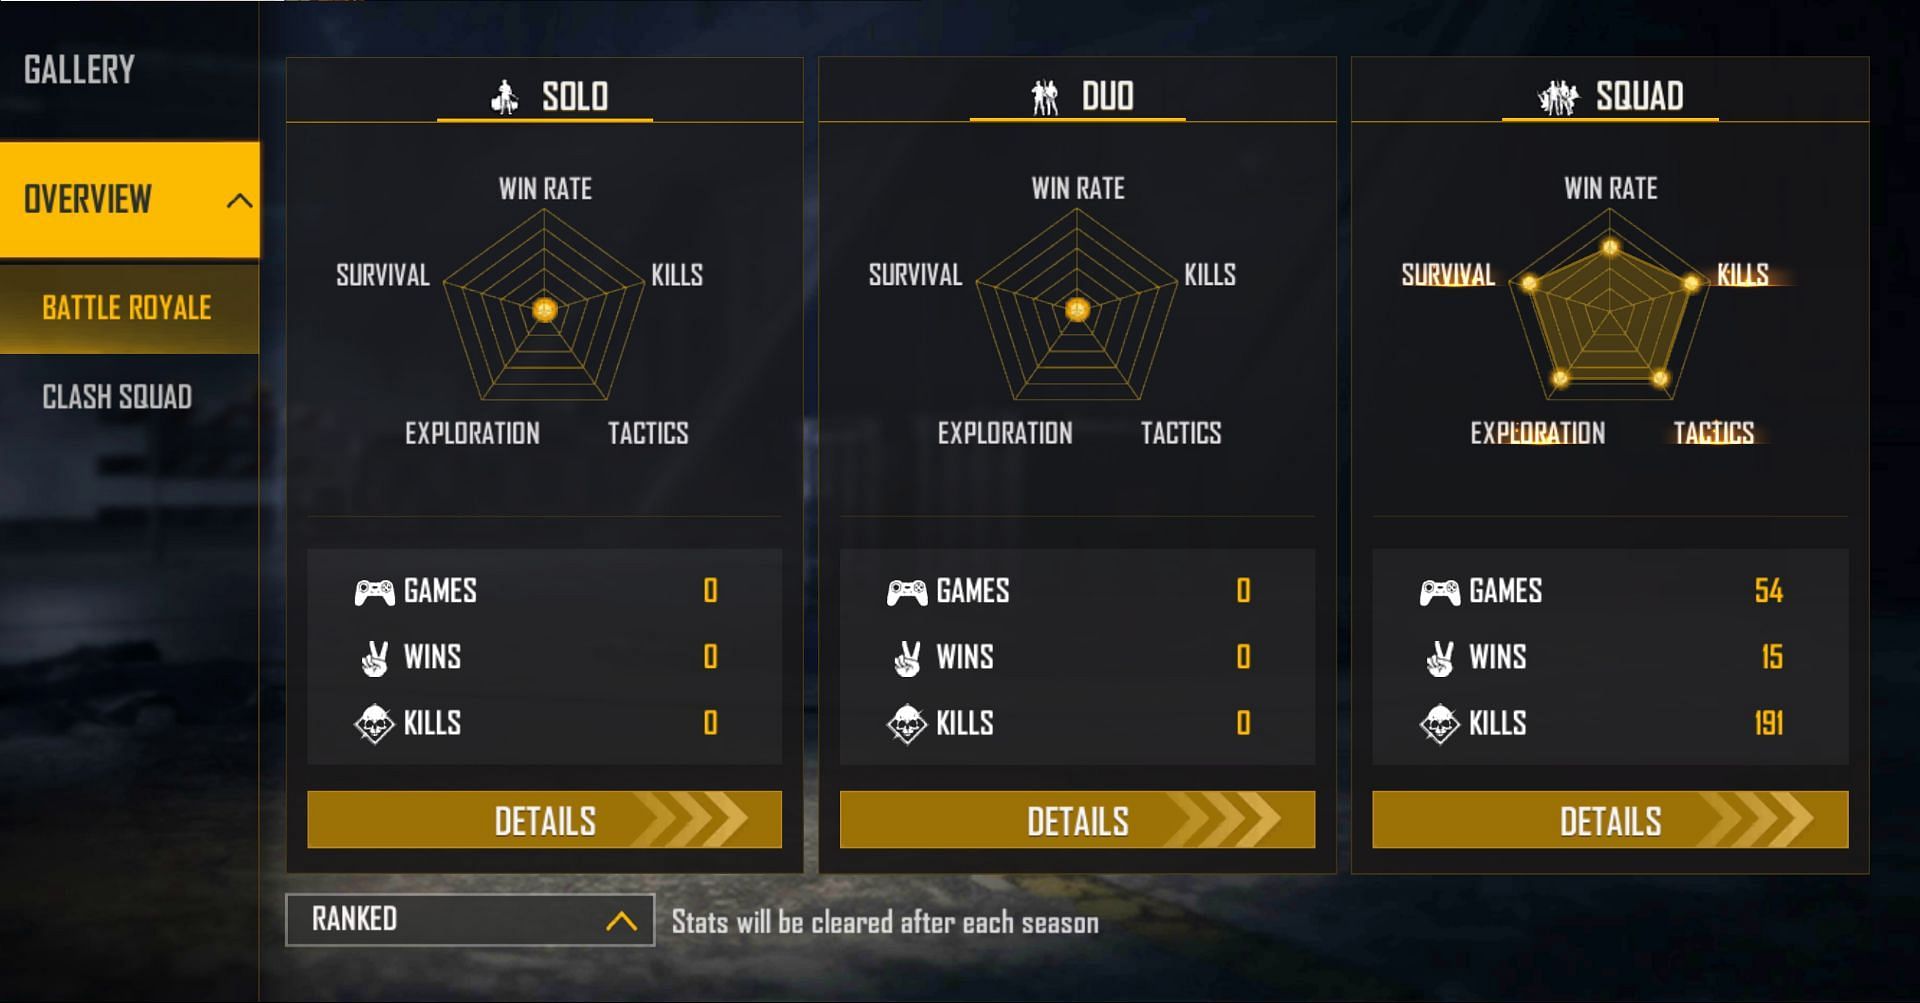 Skylord has only played squad ranked games in the current season (Image via Free Fire)